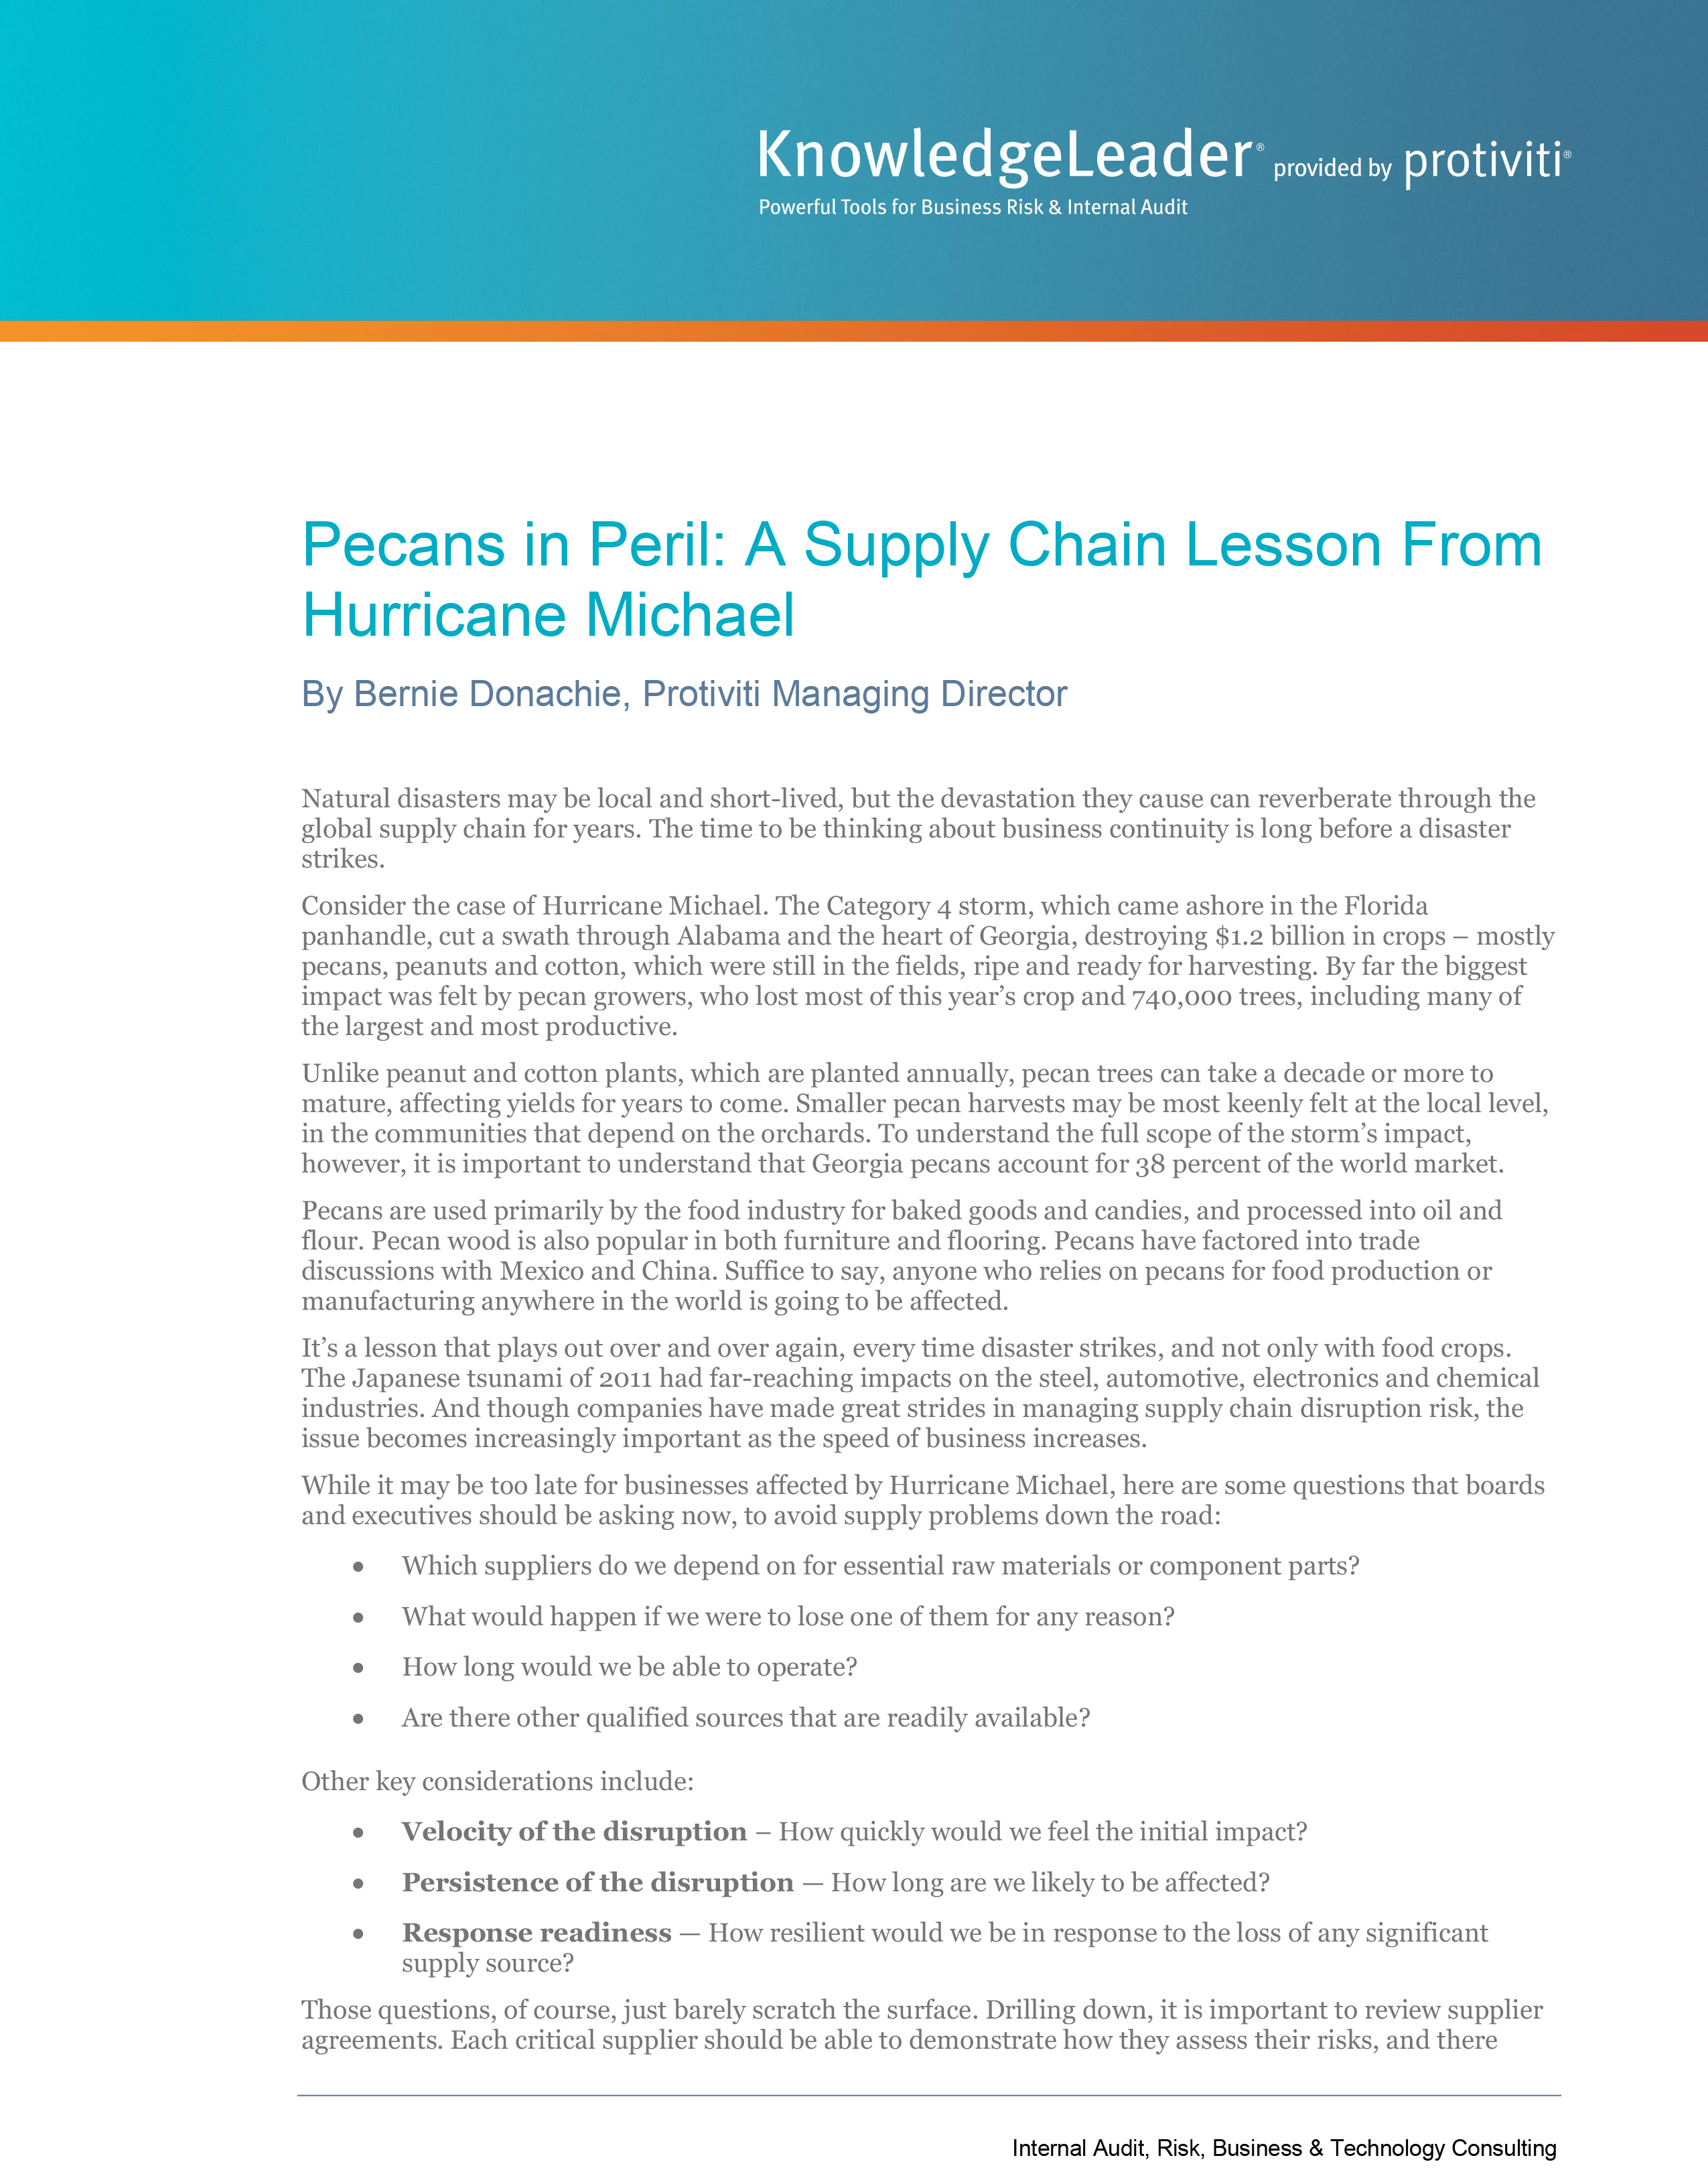 Screenshot of the first page of Pecans in Peril - A Supply Chain Lesson From Hurricane Michael